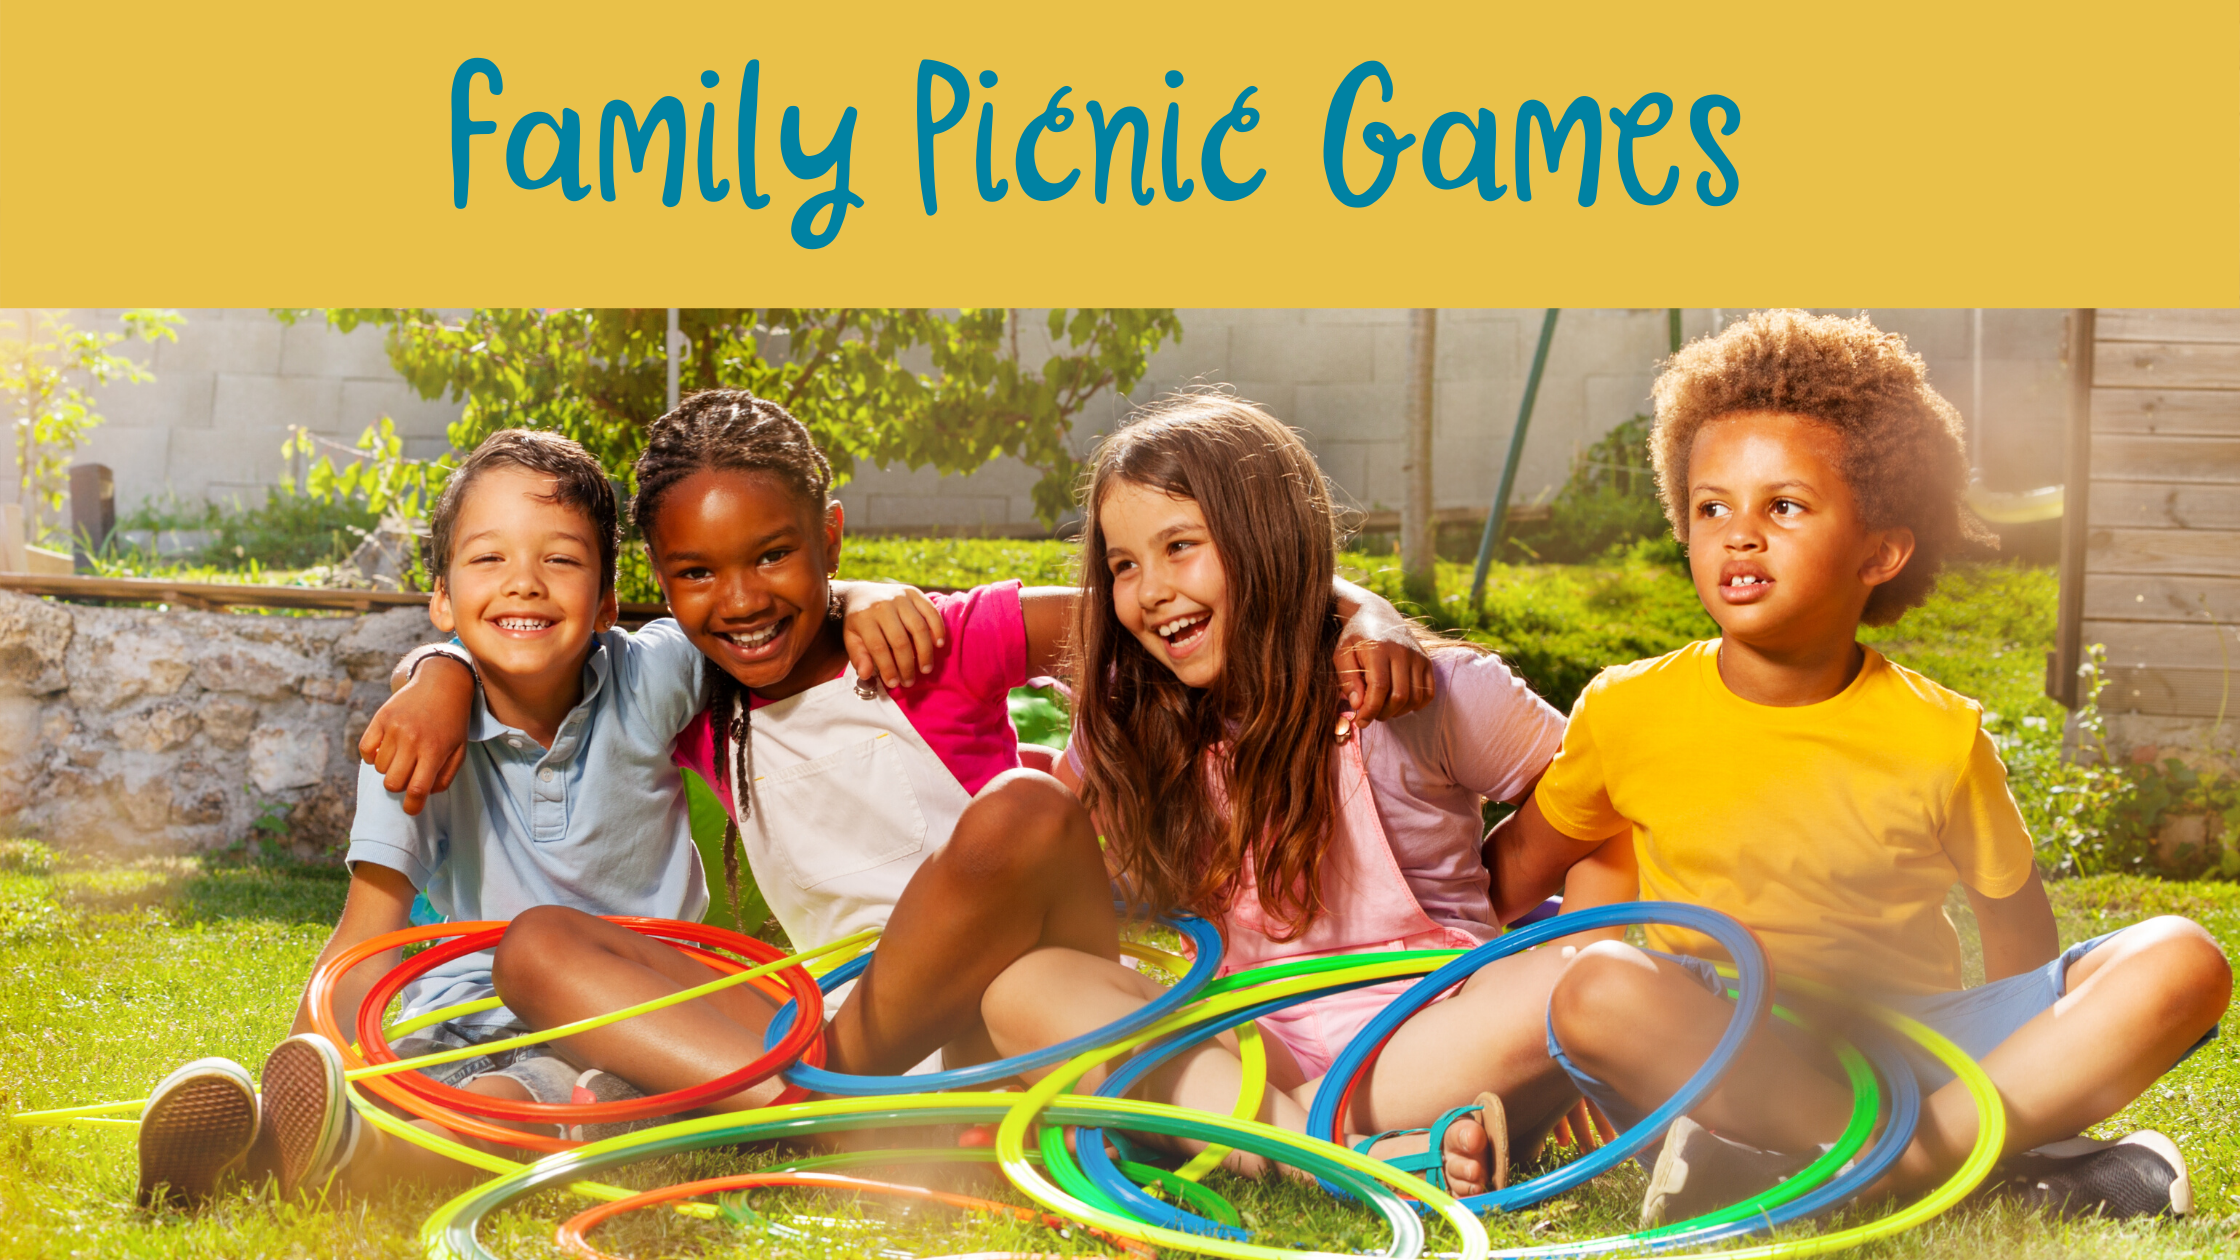 The Picnic Game: A Fun Family Guessing Game